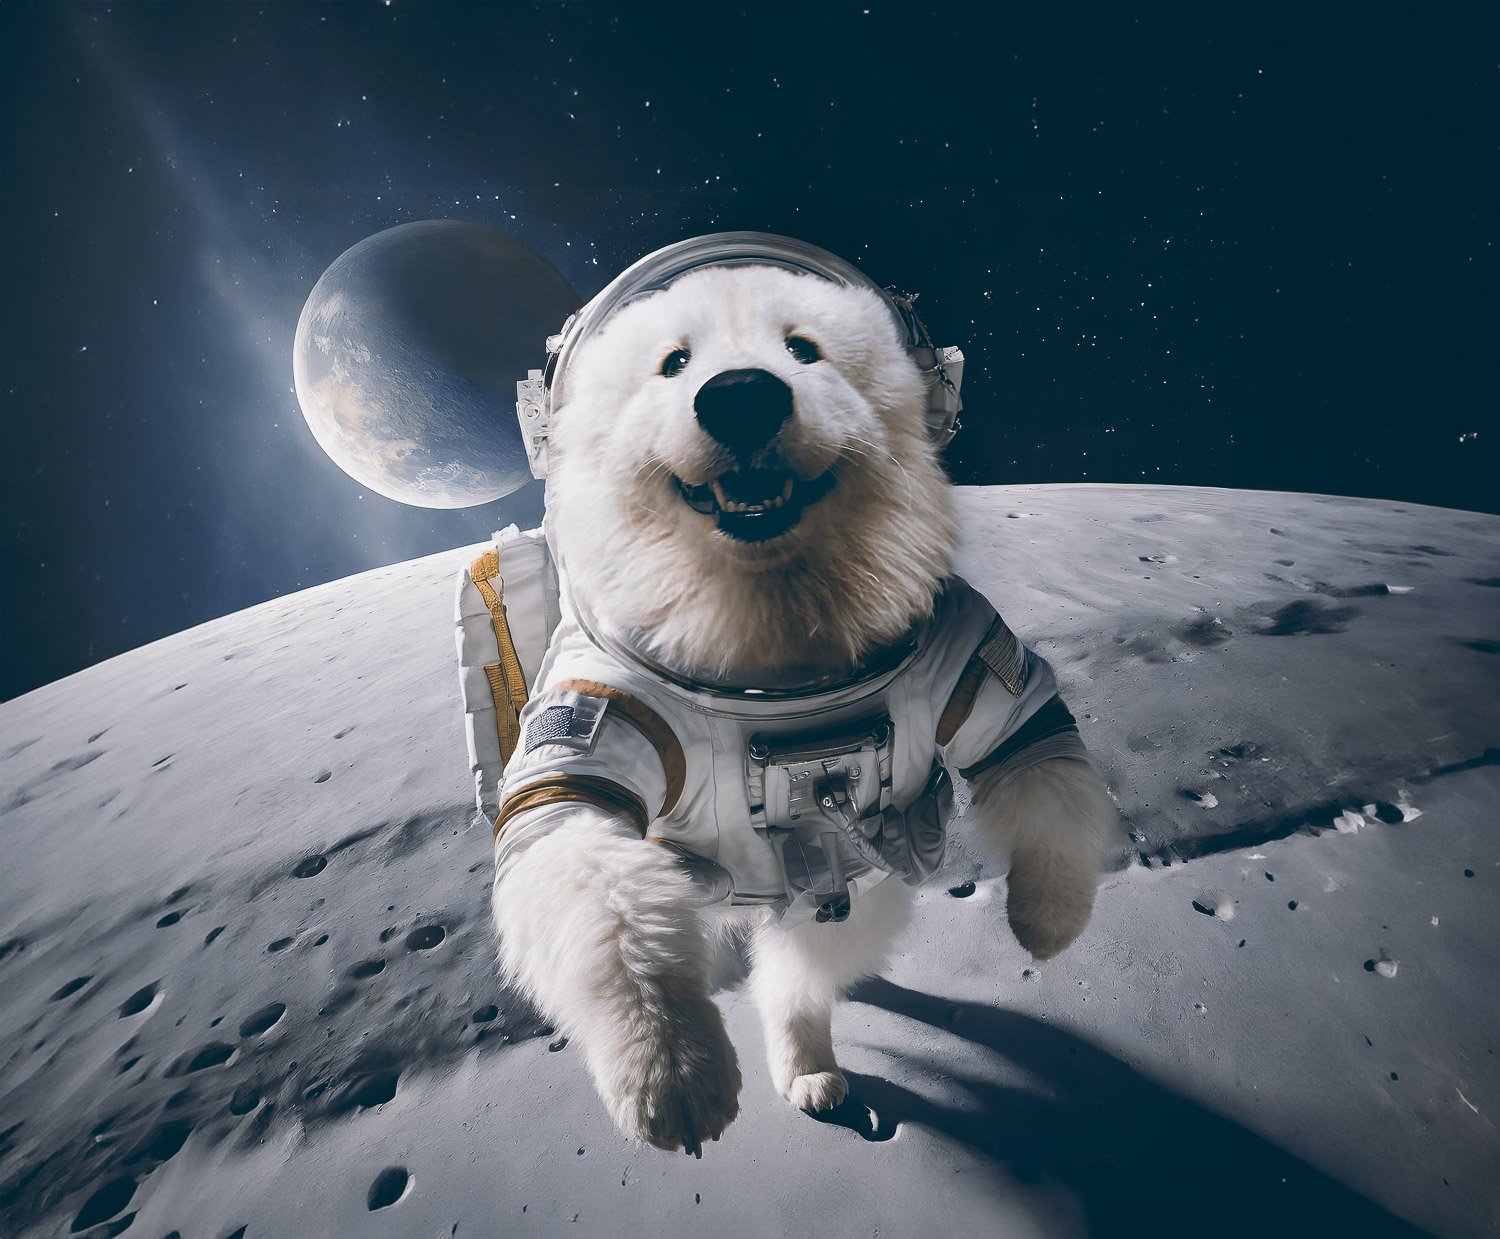 A white fluffy dog in a space suit walking on a desolate planet 